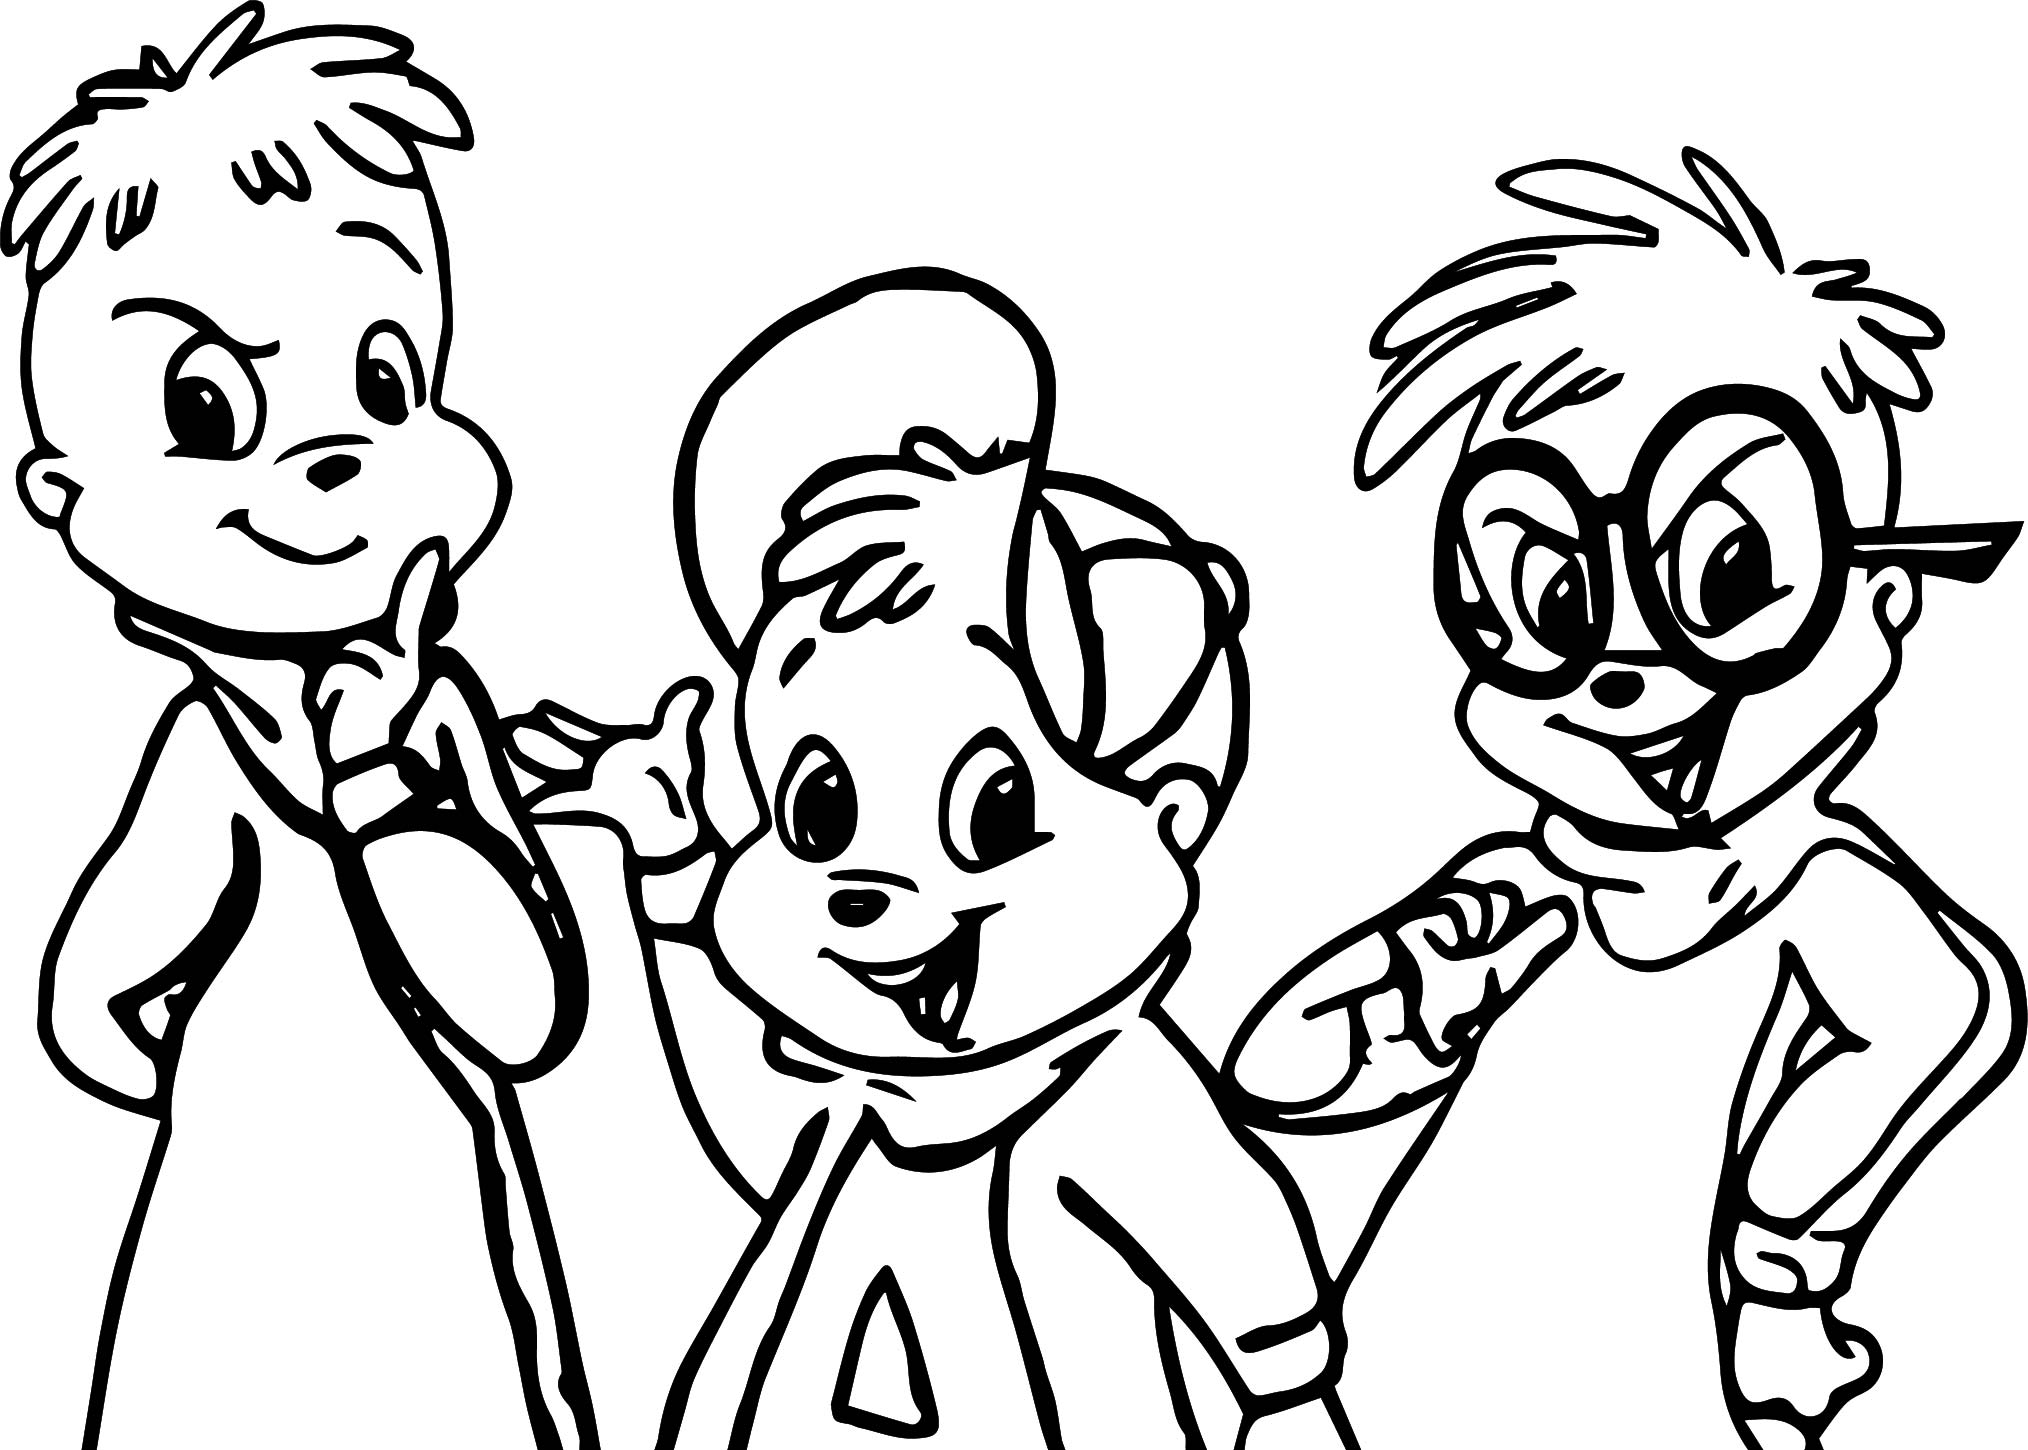 Alvin And Chipmunks Kid Coloring Page | Wecoloringpage.com